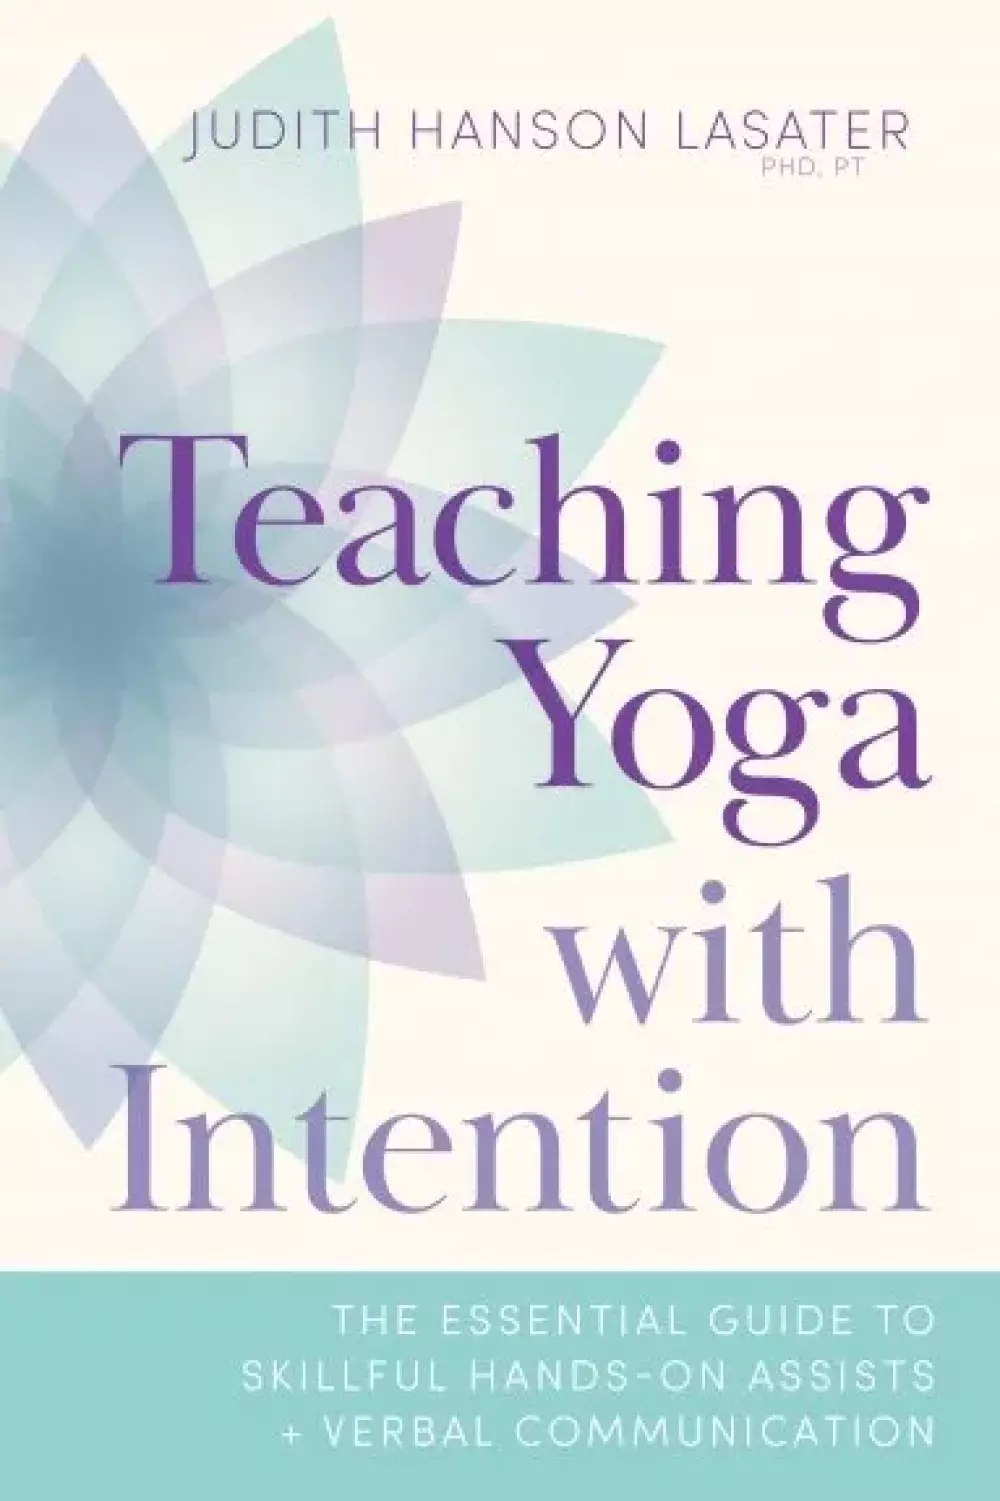 Teaching Yoga with Intention, Bøker, Filosofi & religion, Clear, effective verbal communication and judicious touch are two skills that are essential for every yoga teacher. Drawing from her fifty years of yoga experience and her training in Nonviolent Communication and physical therapy, Judith Hanson Lasater has created the definitive guide to effective and appropriate communication between yoga teachers and their students. She focuses not just on how to explain technique but also on the more subtle lessons of respect, empathy, and compassion. Lasater shines an unflinching light on physical contact in yoga. Teachers often use touch to create understanding and awareness in the poses. But this is a nuanced art, and Lasater gives clear guidance on how, where, and when it is appropriate to further a student’s development. Lasater also empowers students by encouraging them to take ownership of and responsibility for their practice: learning how and when to say no to an adjustment, keeping boundaries, knowing when to leave a class, how to communicate your needs to your yoga teacher, and if and when to report a teacher’s behavior. The skills that Lasater offers in this clear, practical book will help create a safe and optimal learning environment for all students and teachers.